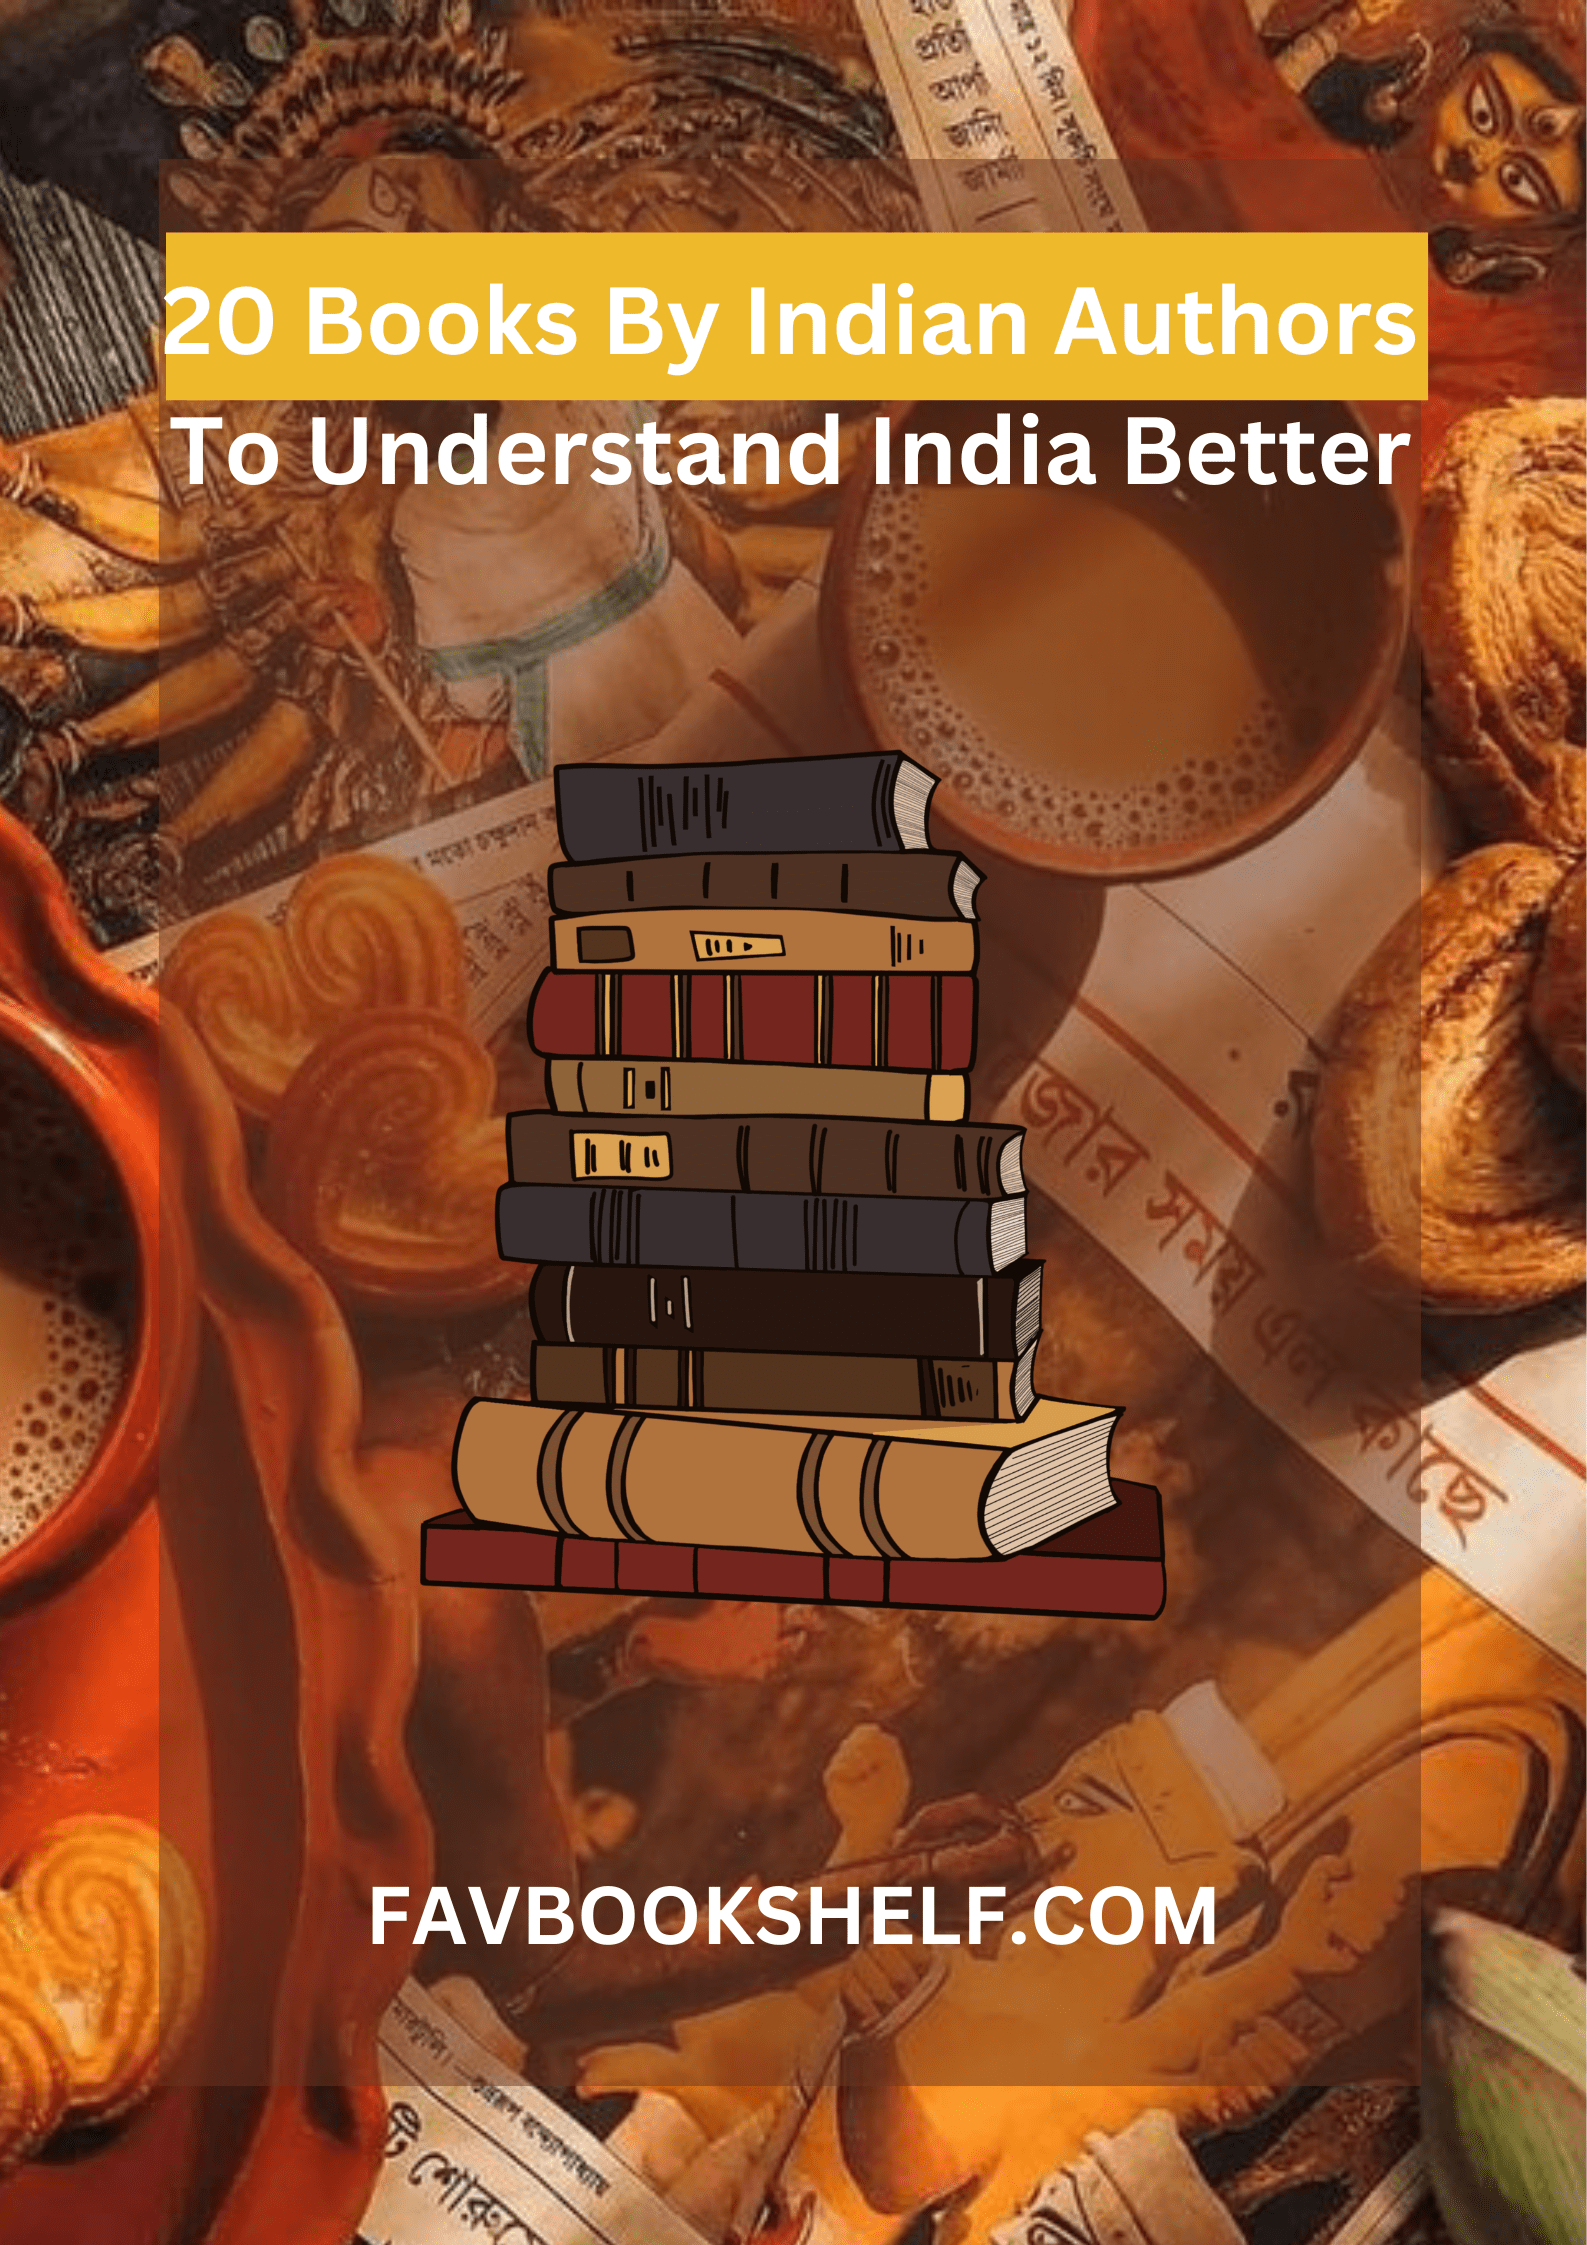 20 Books By Indian Authors To Understand India Better - Favbookshelf